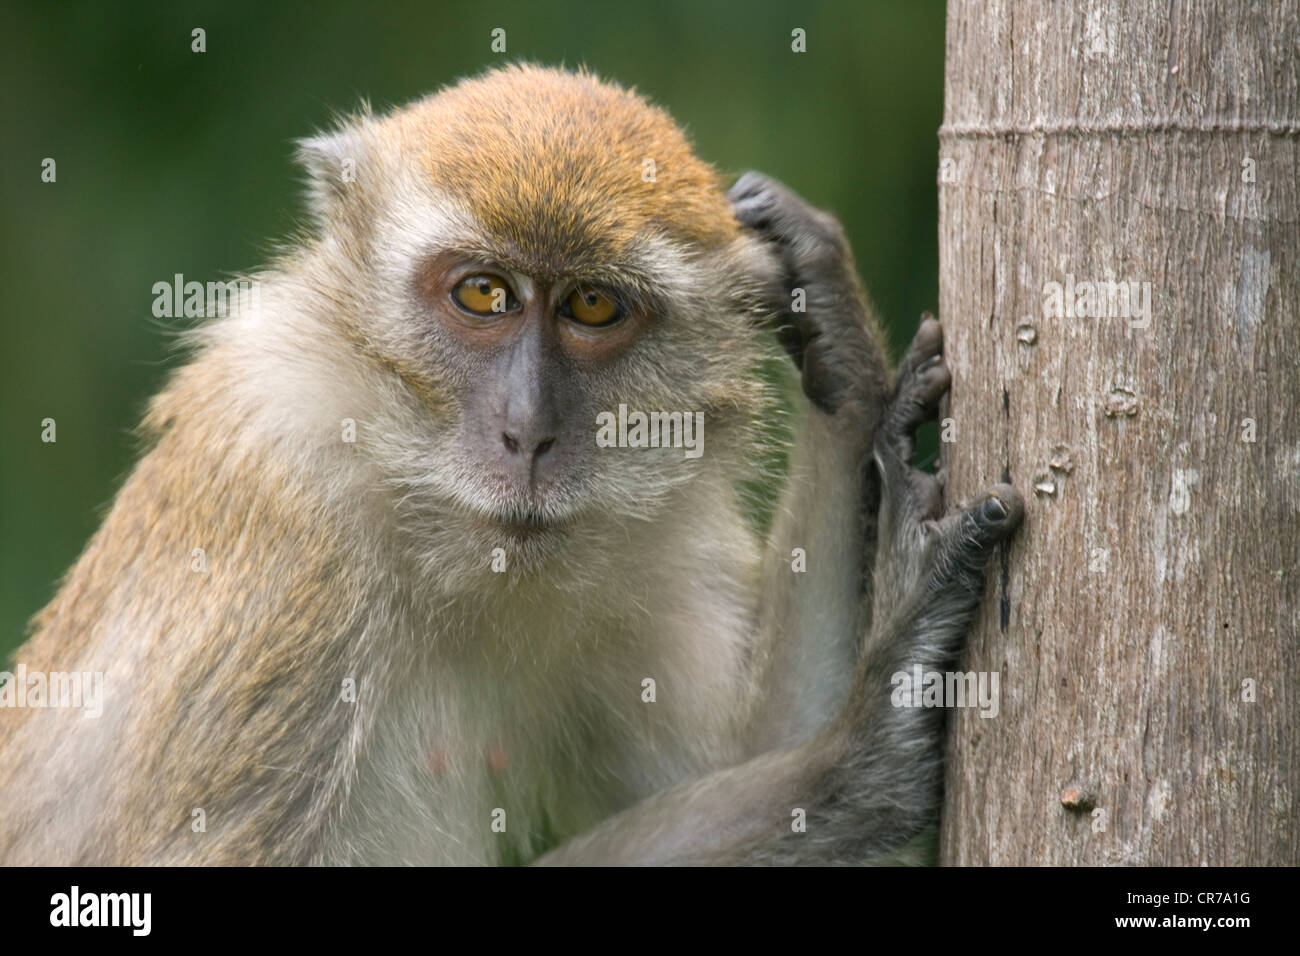 Albino Macaque Monkey Close-up. Beautiful Eyes Of An Animal. Stock Photo,  Picture and Royalty Free Image. Image 201992791.